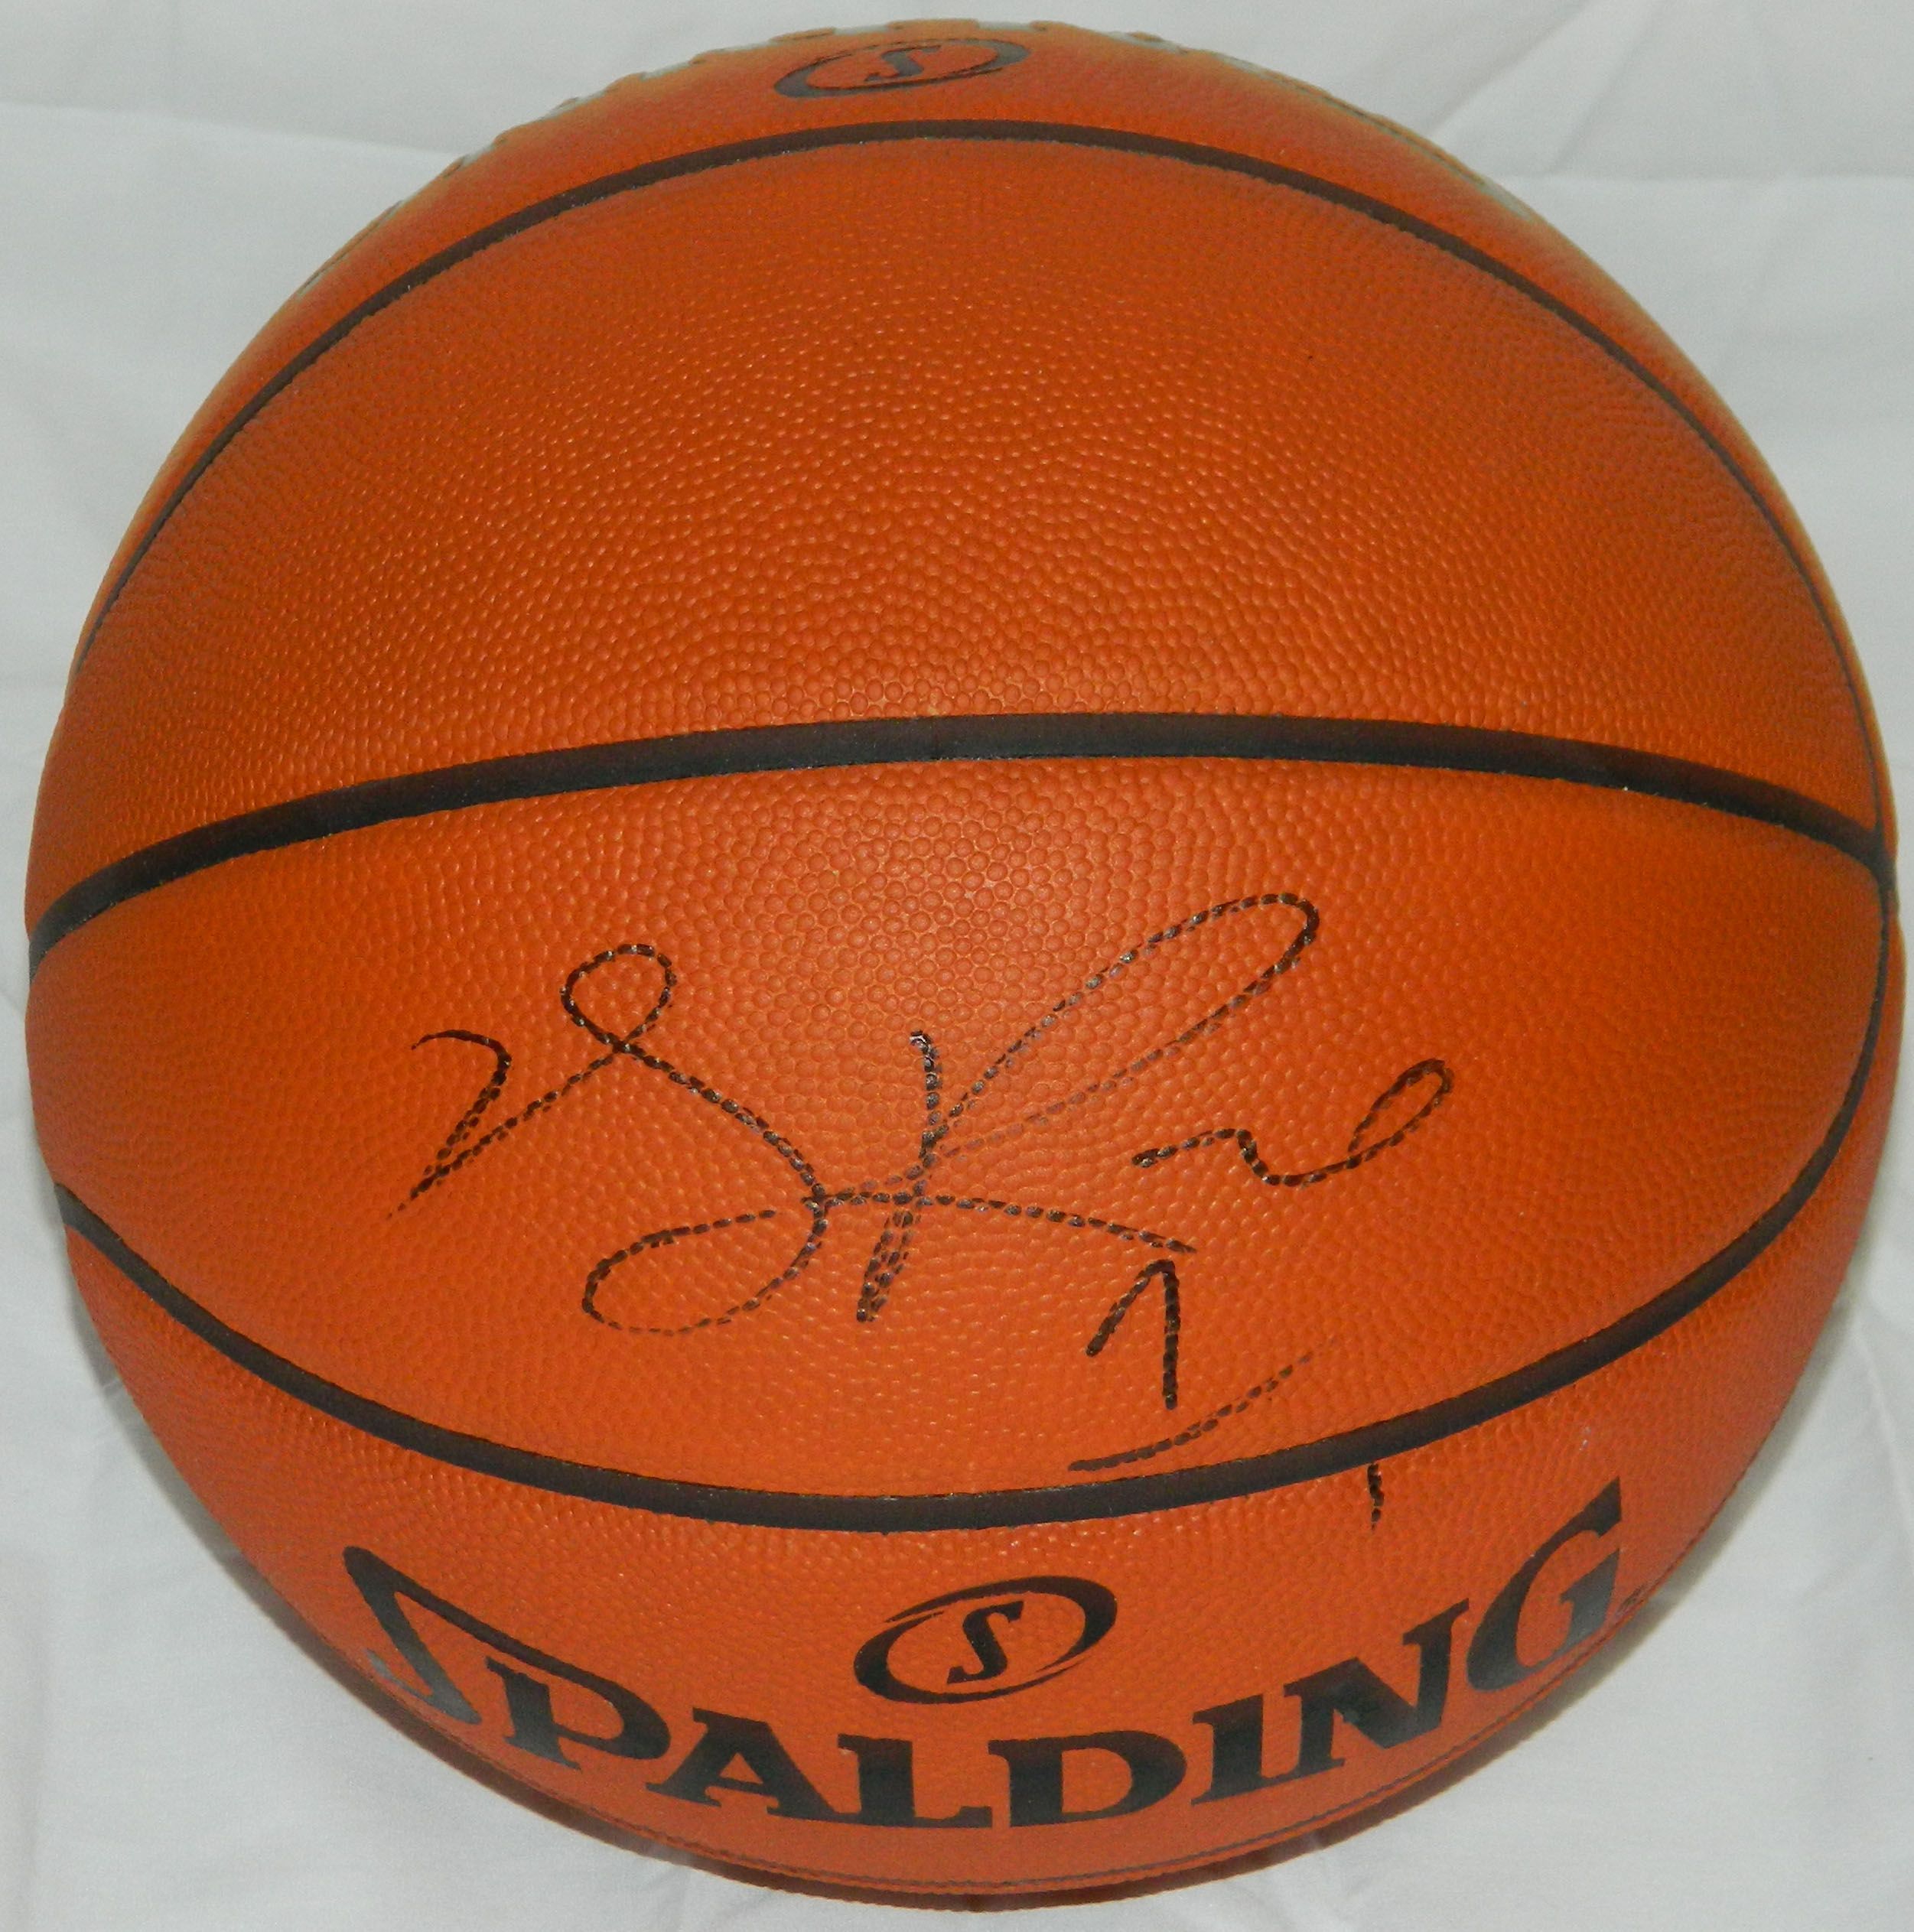   DERRICK ROSE Signed Spalding Official NBA Leather Game Basketball   SS